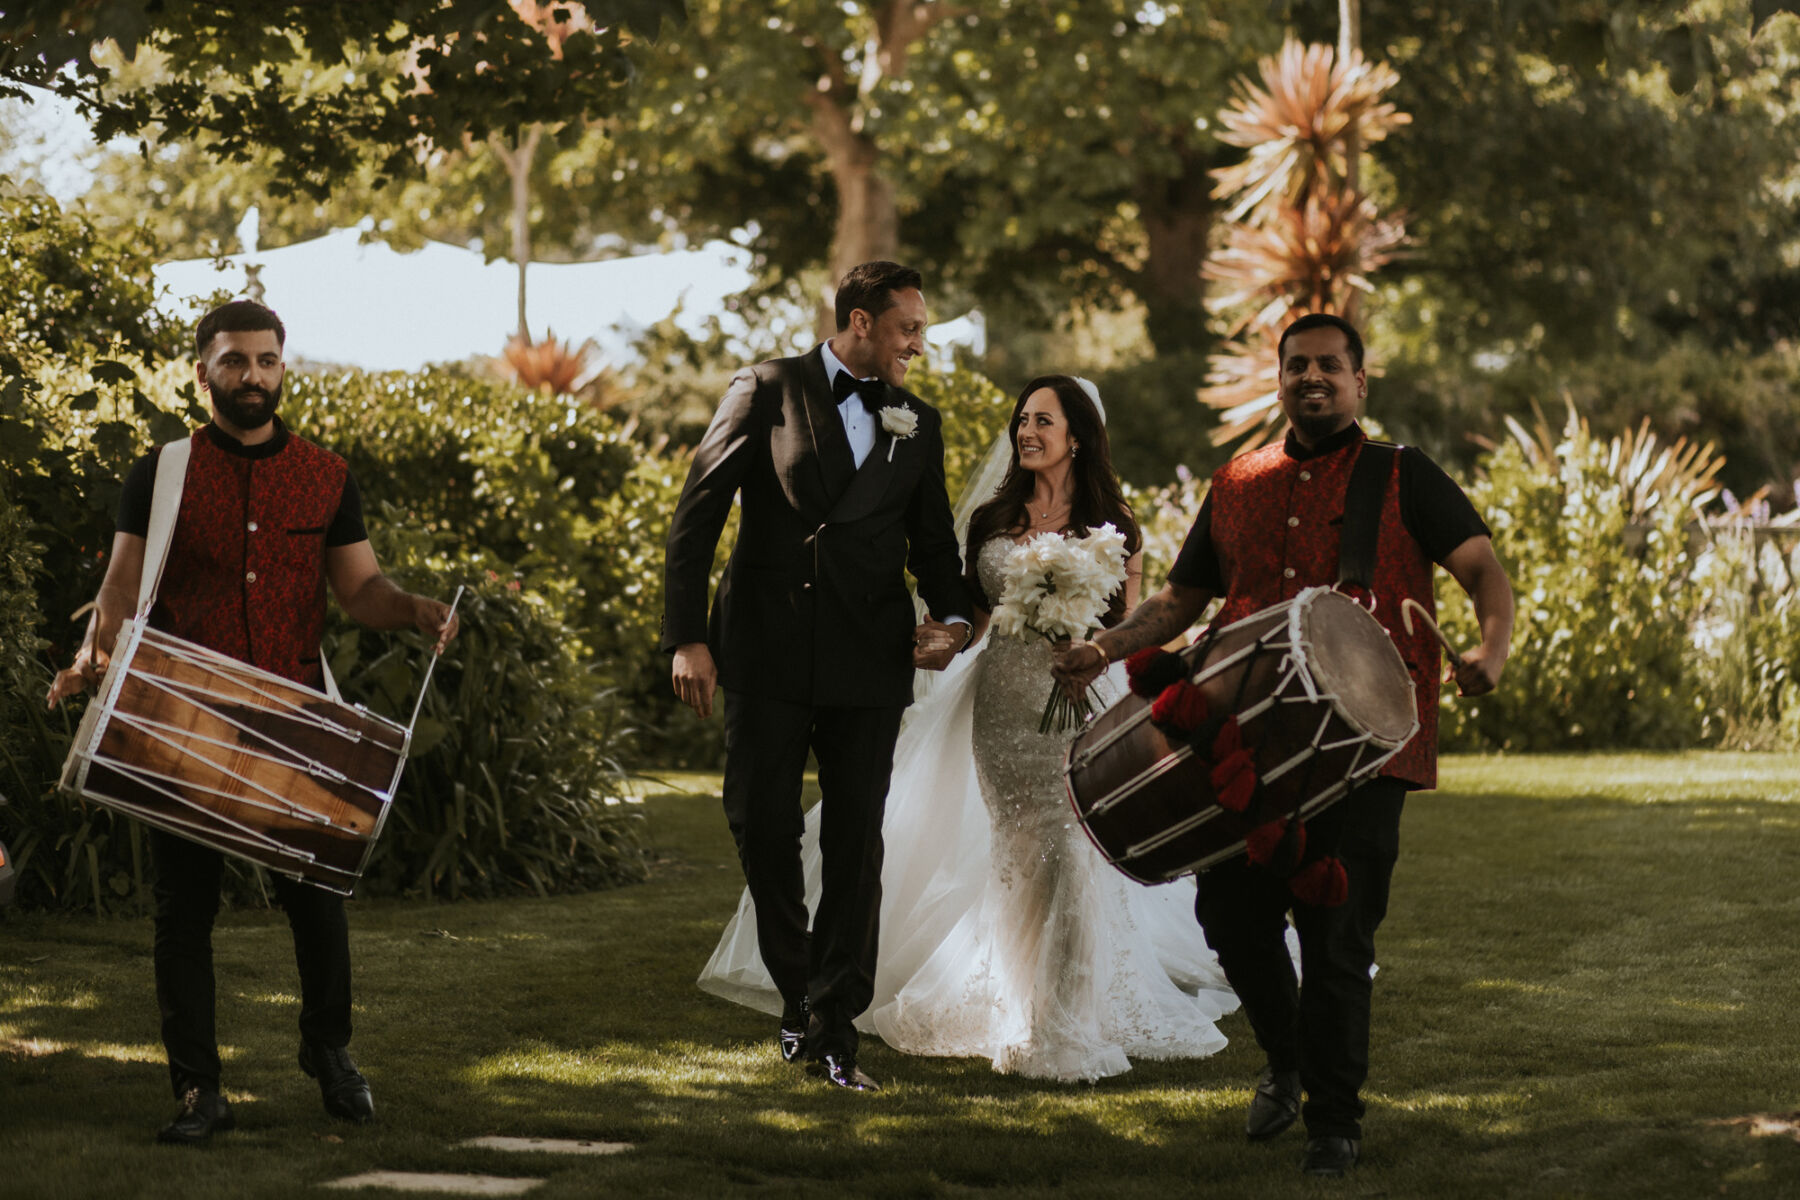 Drummers entertaining the bride and groom at The Pennsylvania Castle Estate - a Dorset wedding venue on a clifftop with incredible sea views.